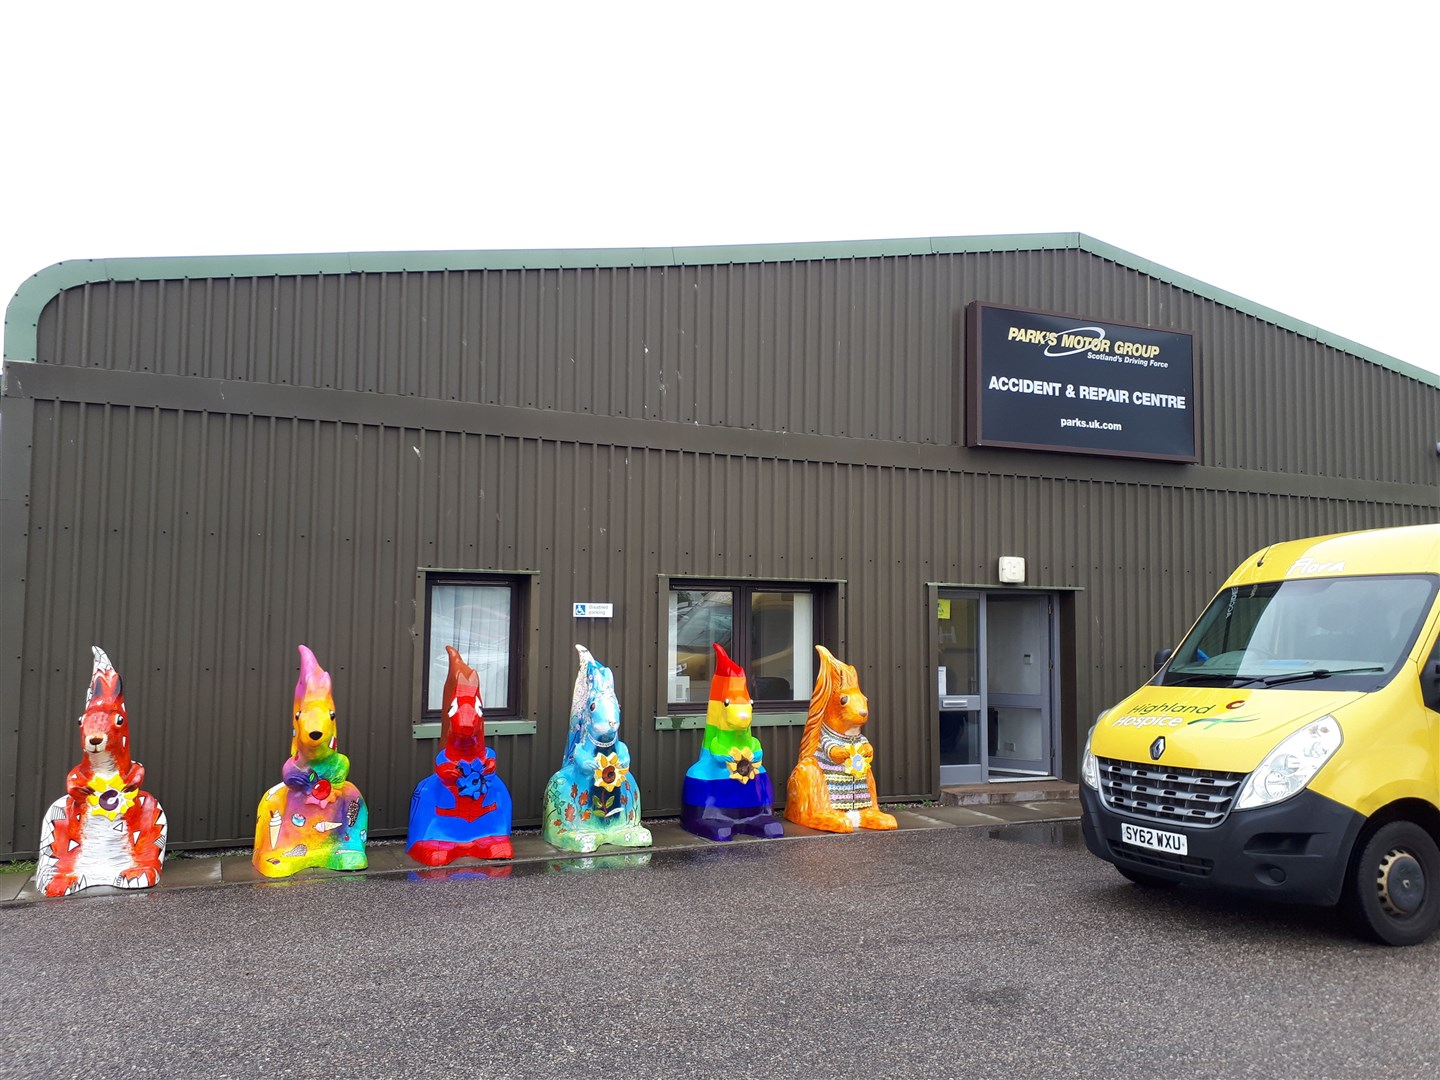 Parks Motor Group have been helping to weatherproof the statues.